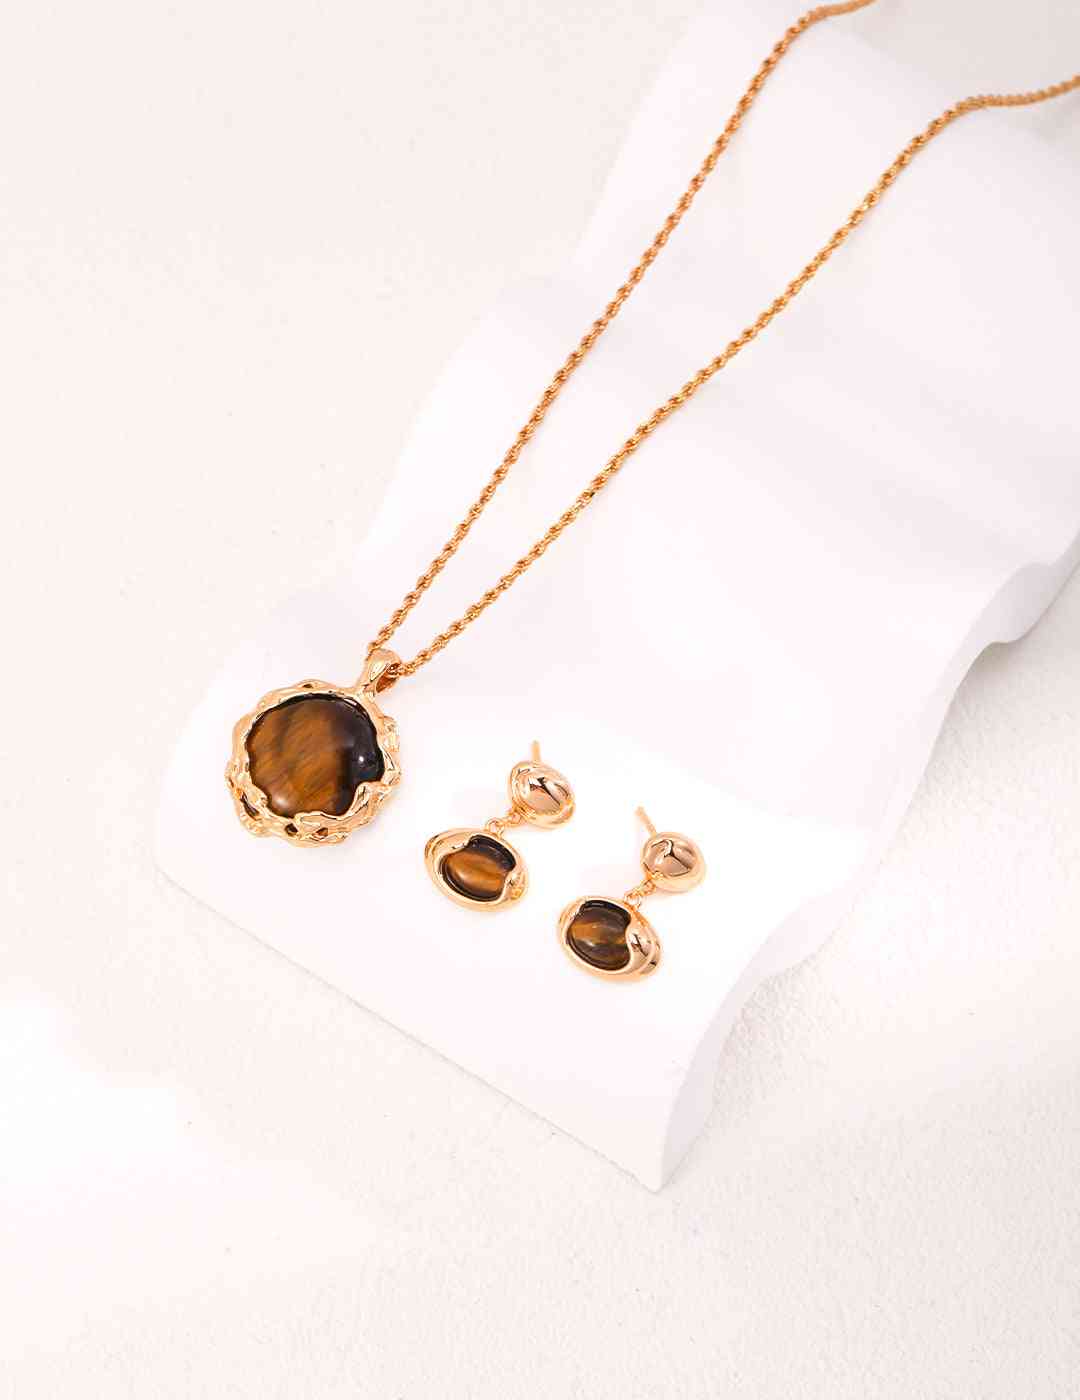 a tiger's eye stone necklace and earring set on a white surface